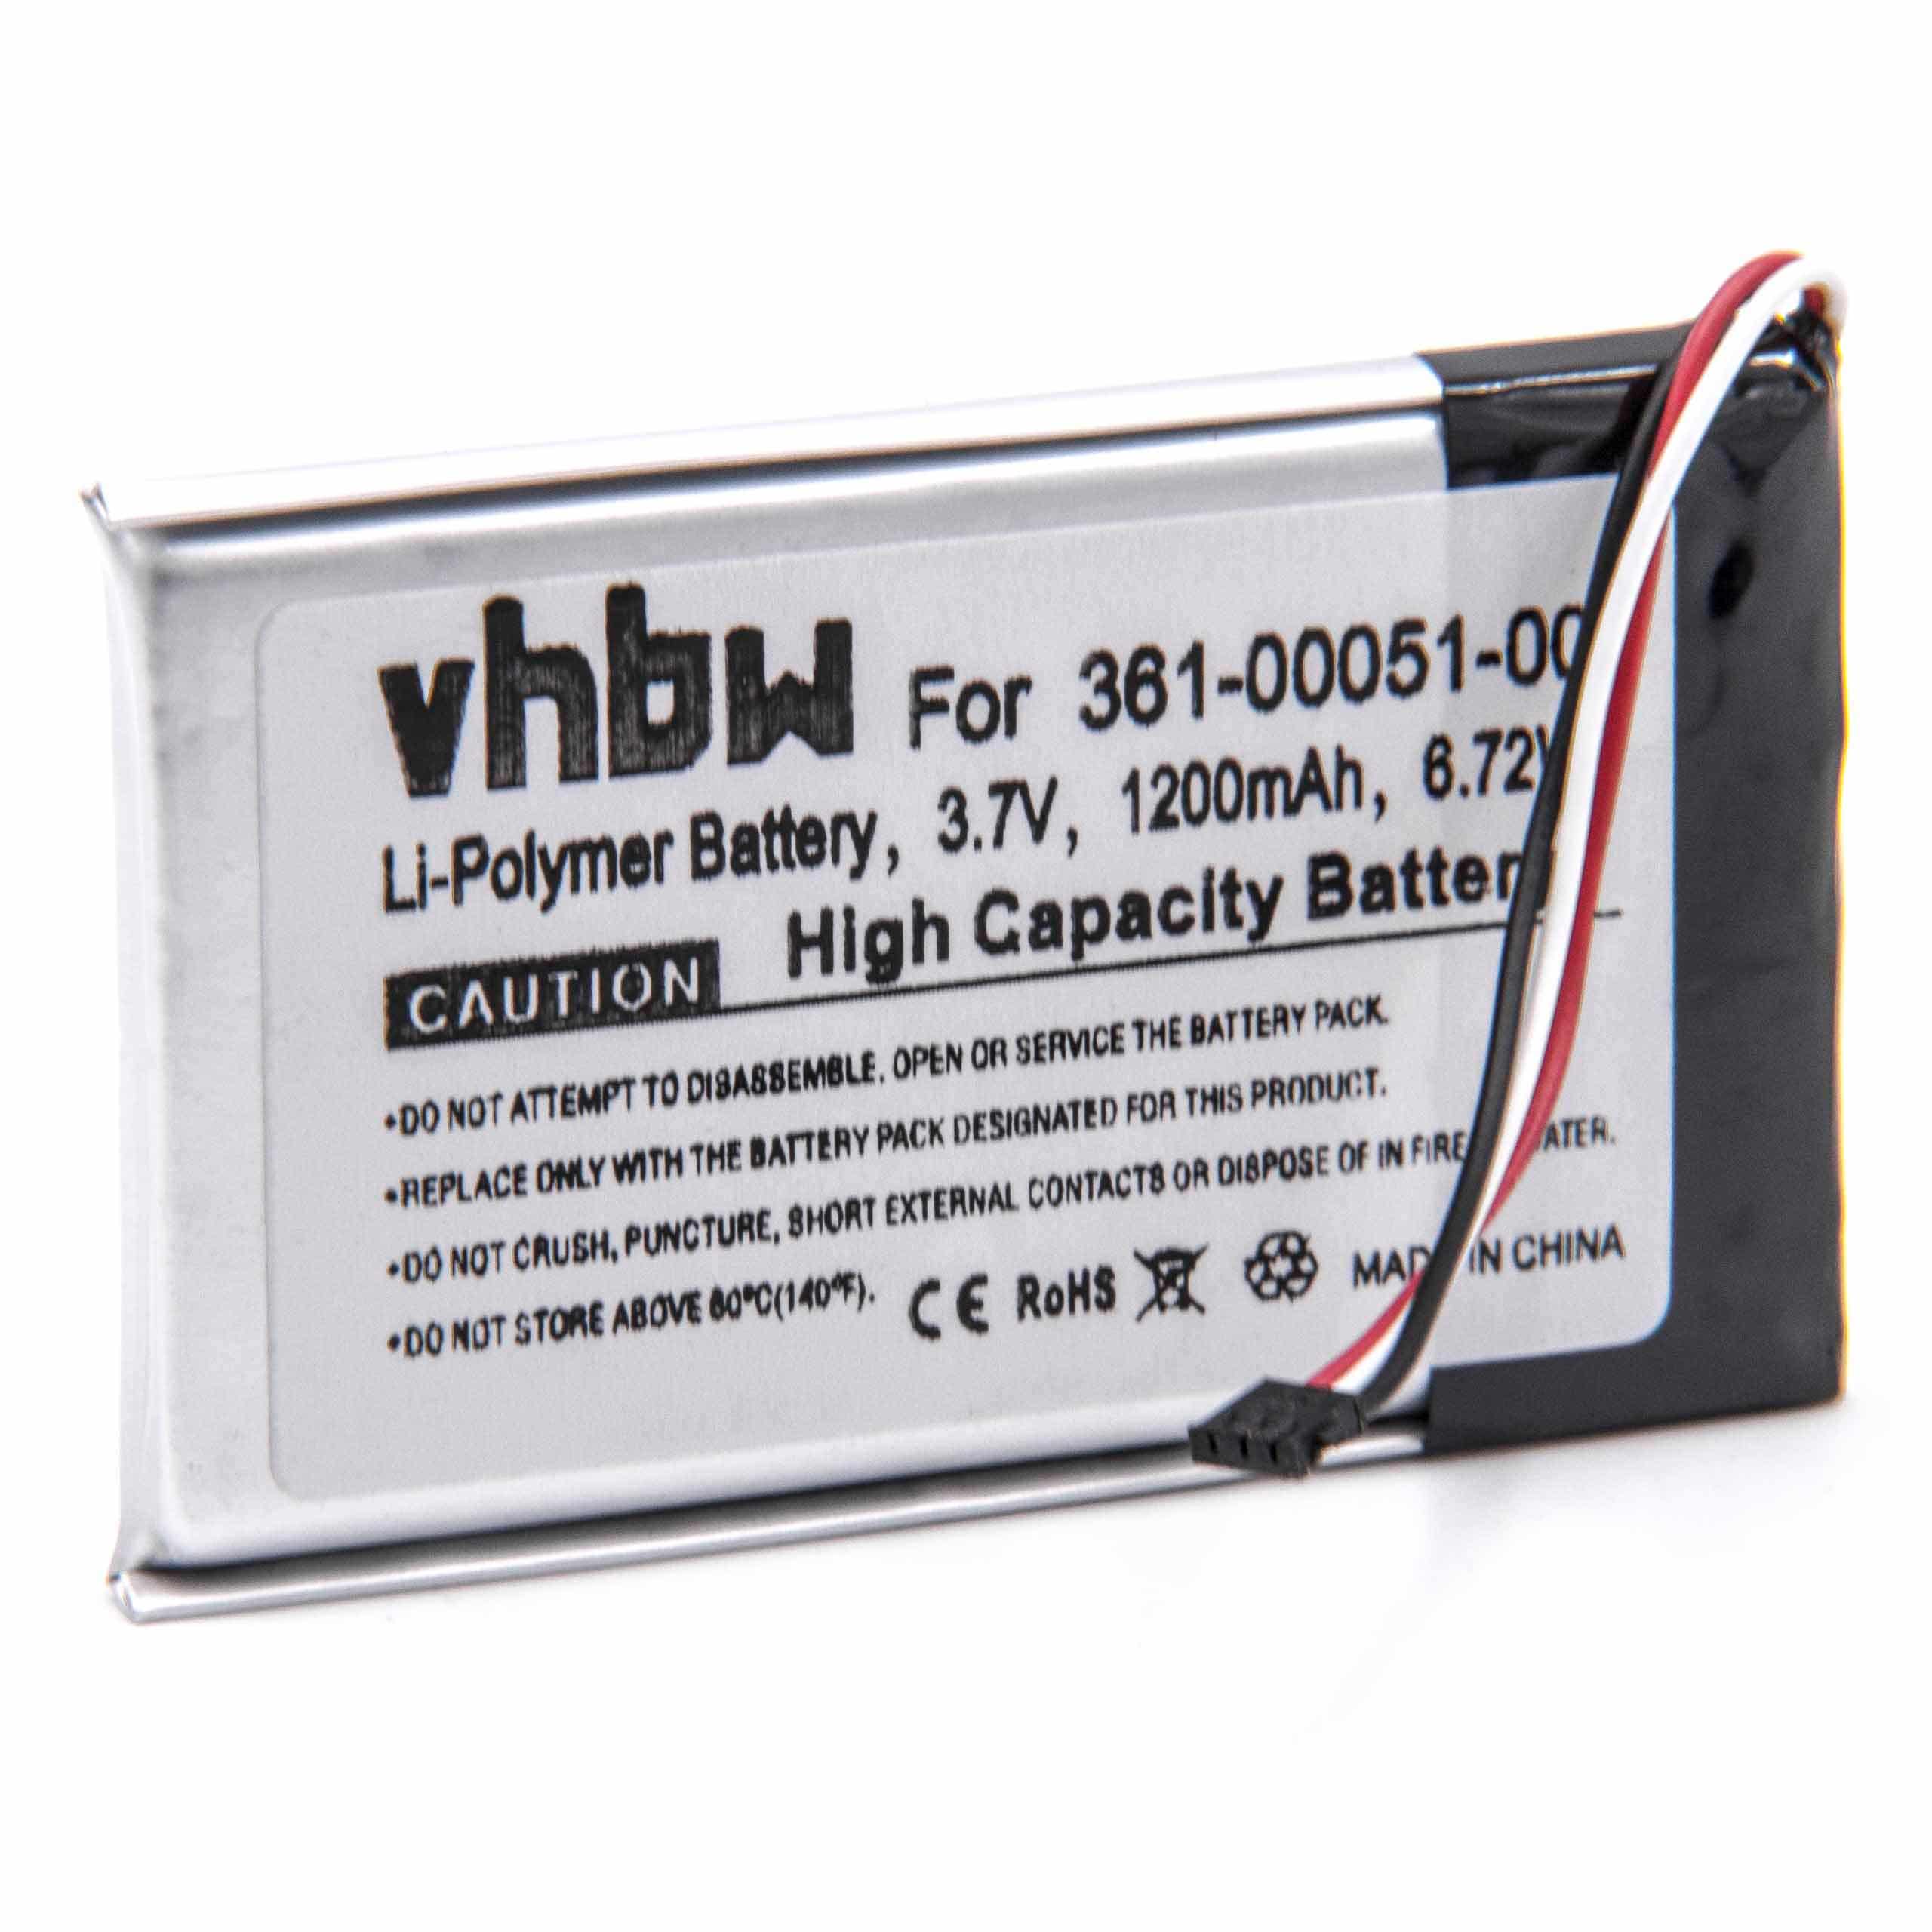 GPS Battery Replacement for Garmin 361-00051-01, 361-00051-12, 361-00051-02, 361-00051-00 - 1200mAh, 3.7V